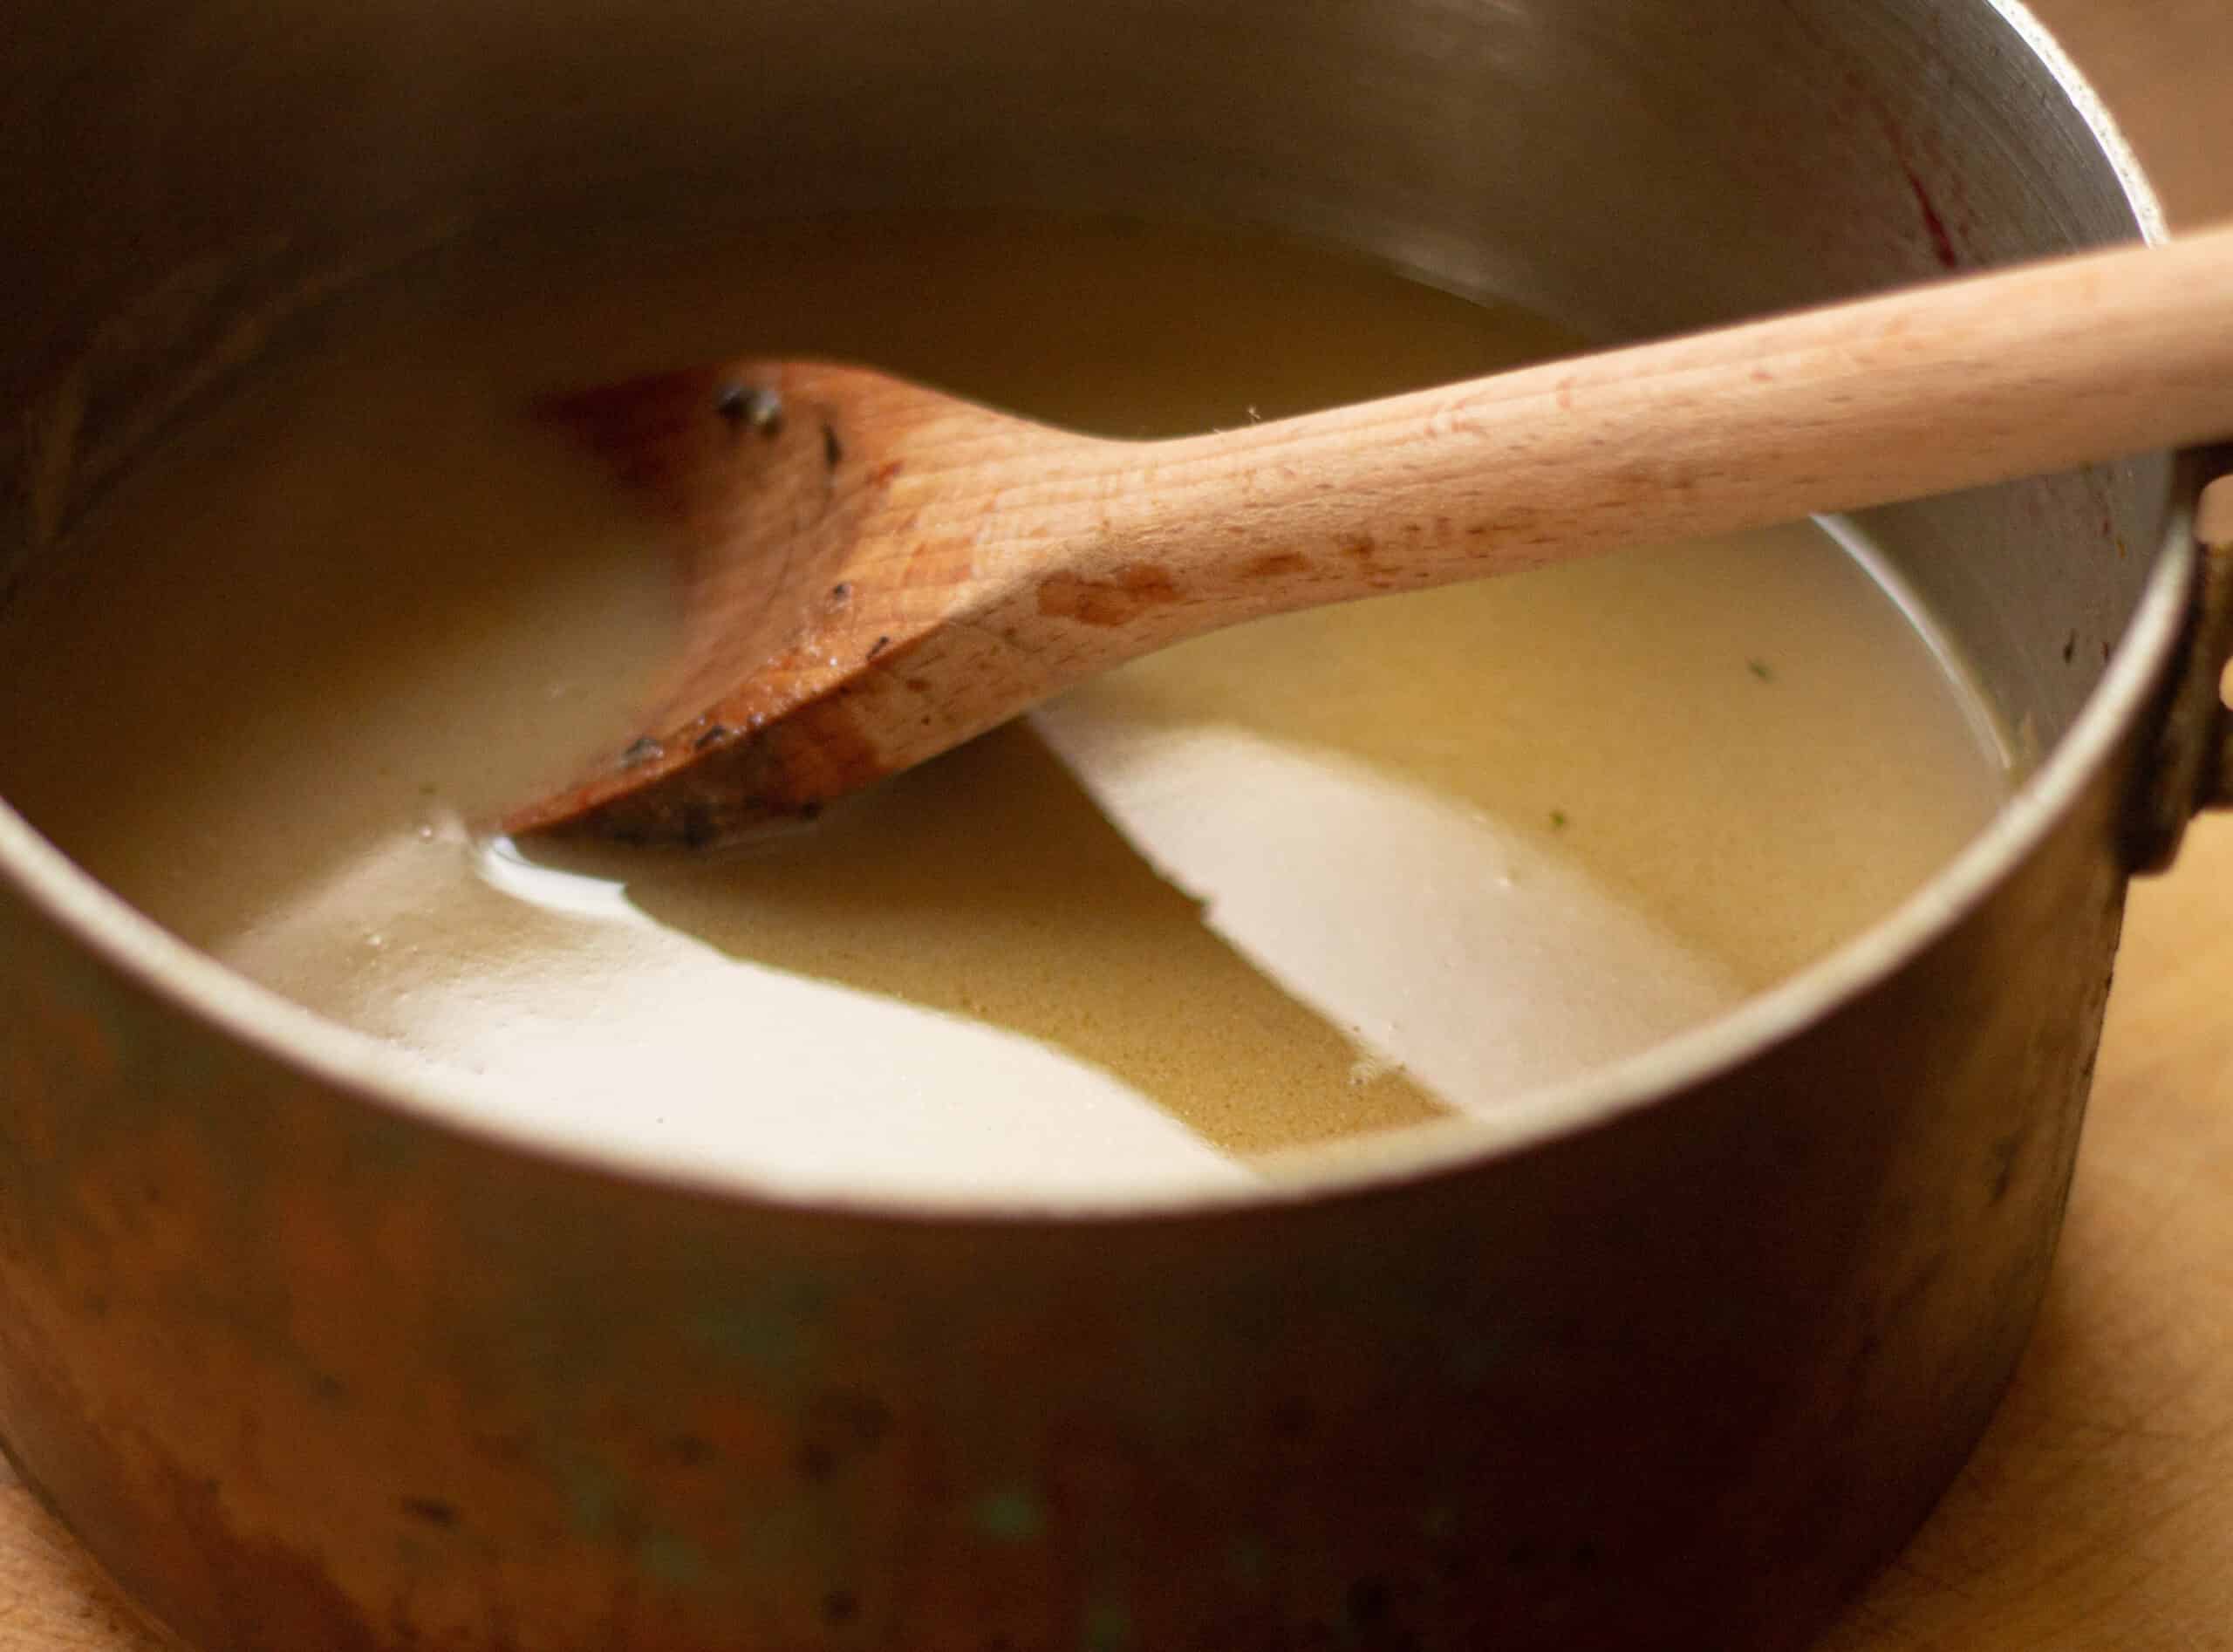 Making a white sauce for the soup